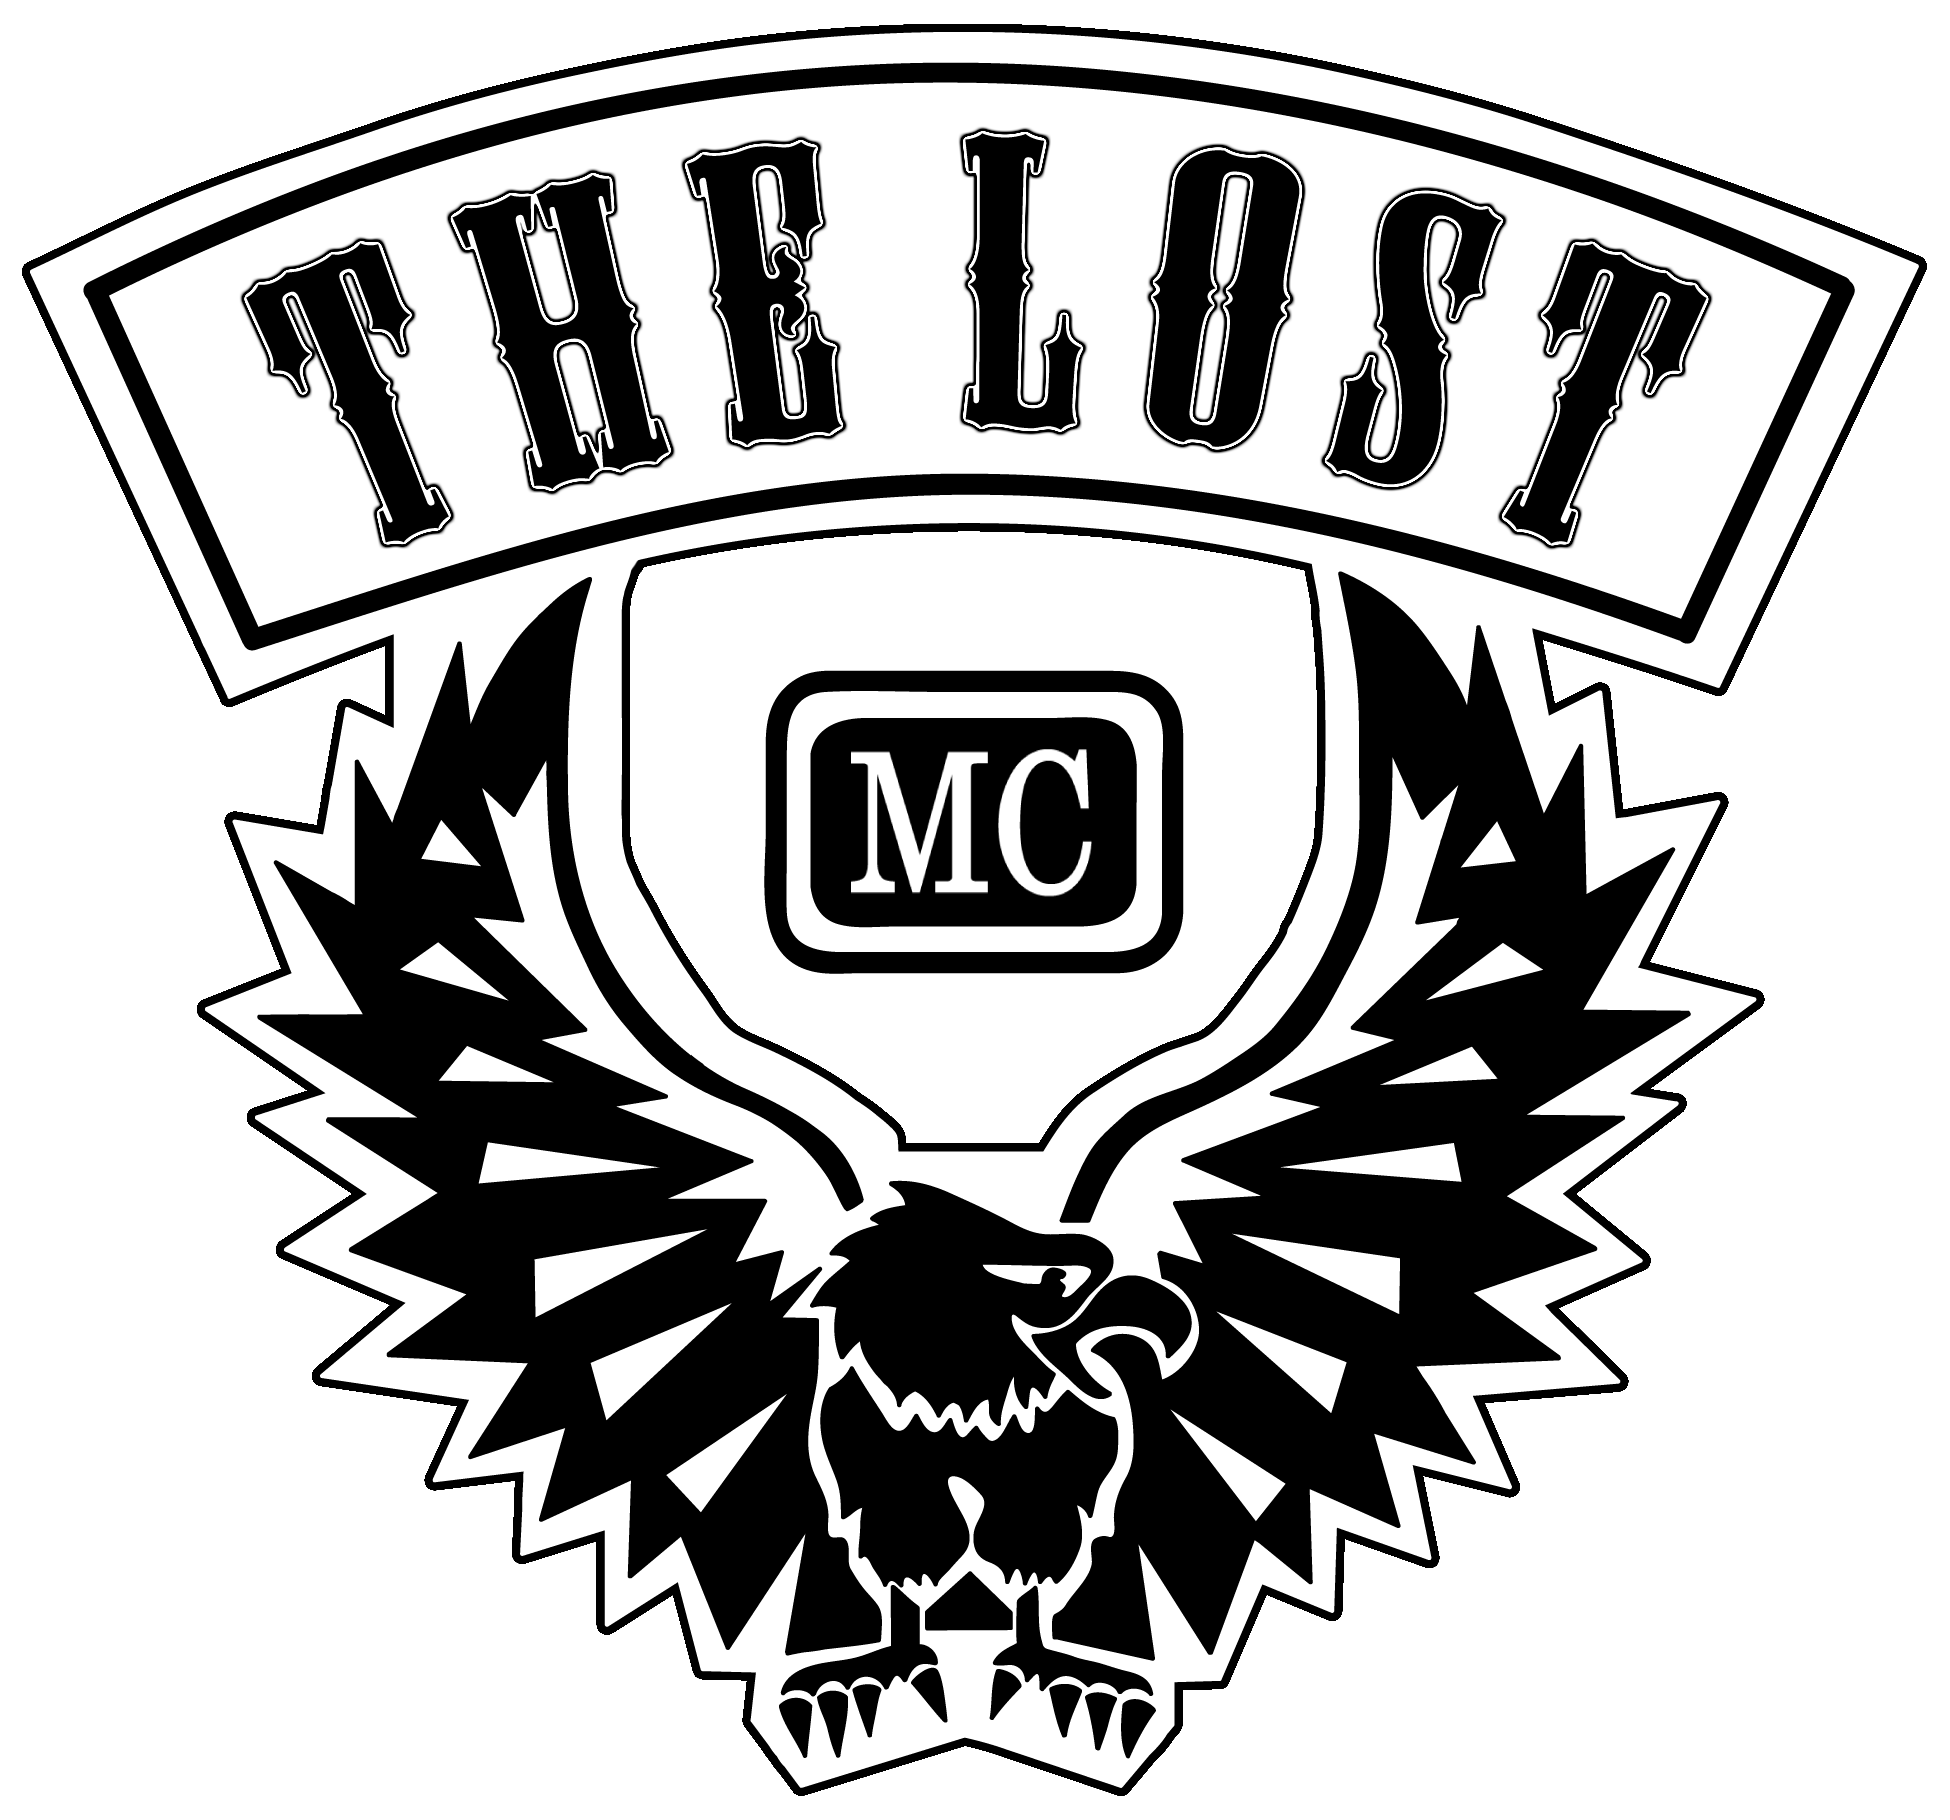 The_Lost_Insignia.png